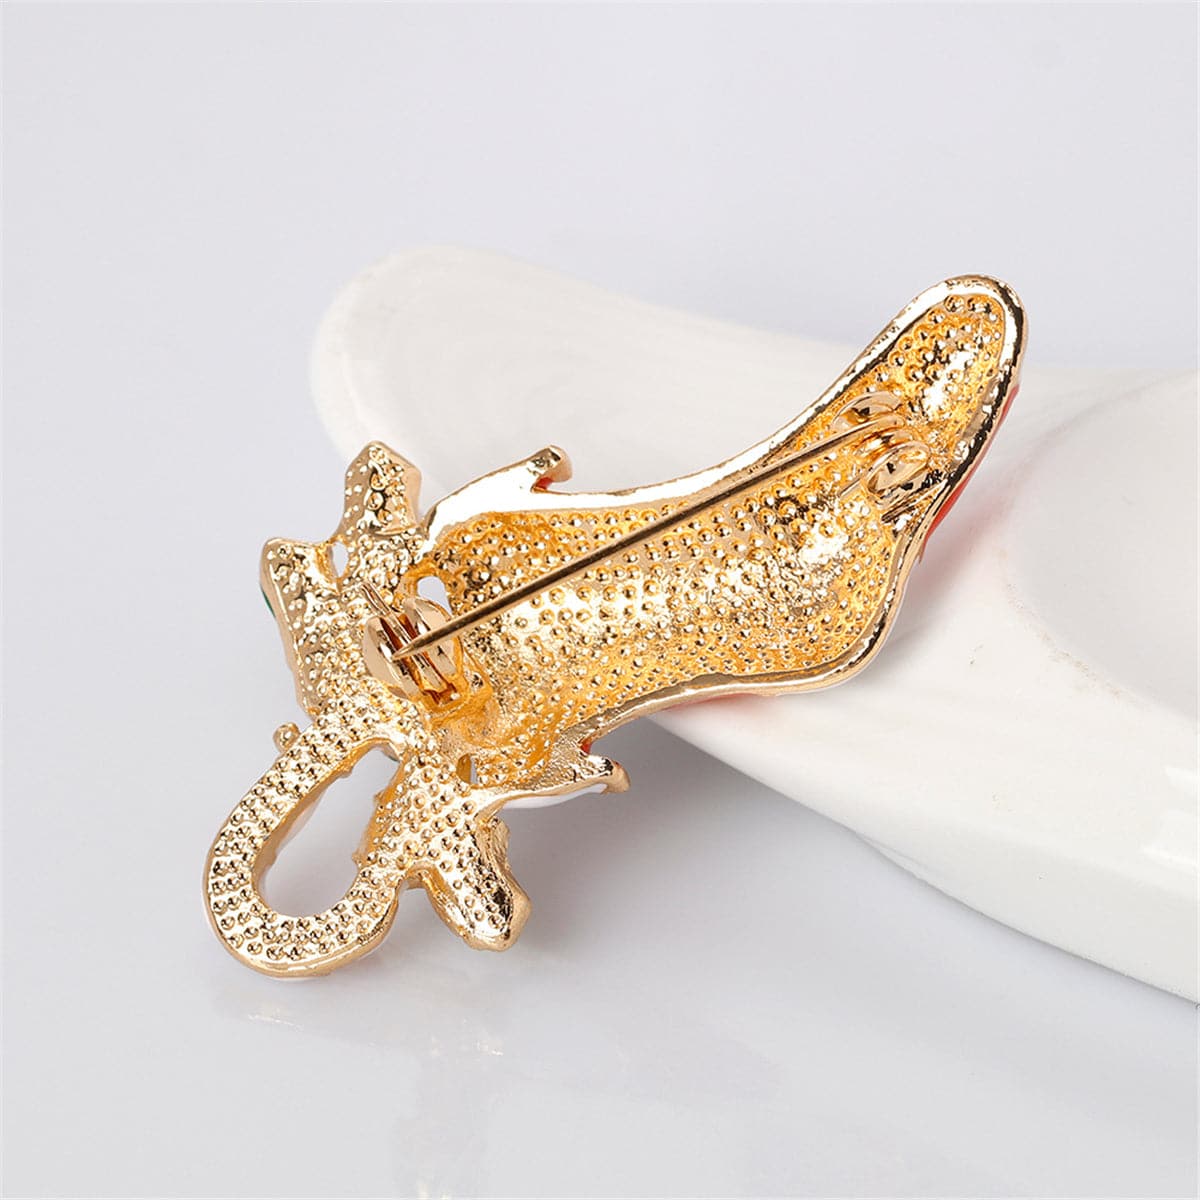 Cubic Zirconia & 18K Gold-Plated Botany Stocking Brooch